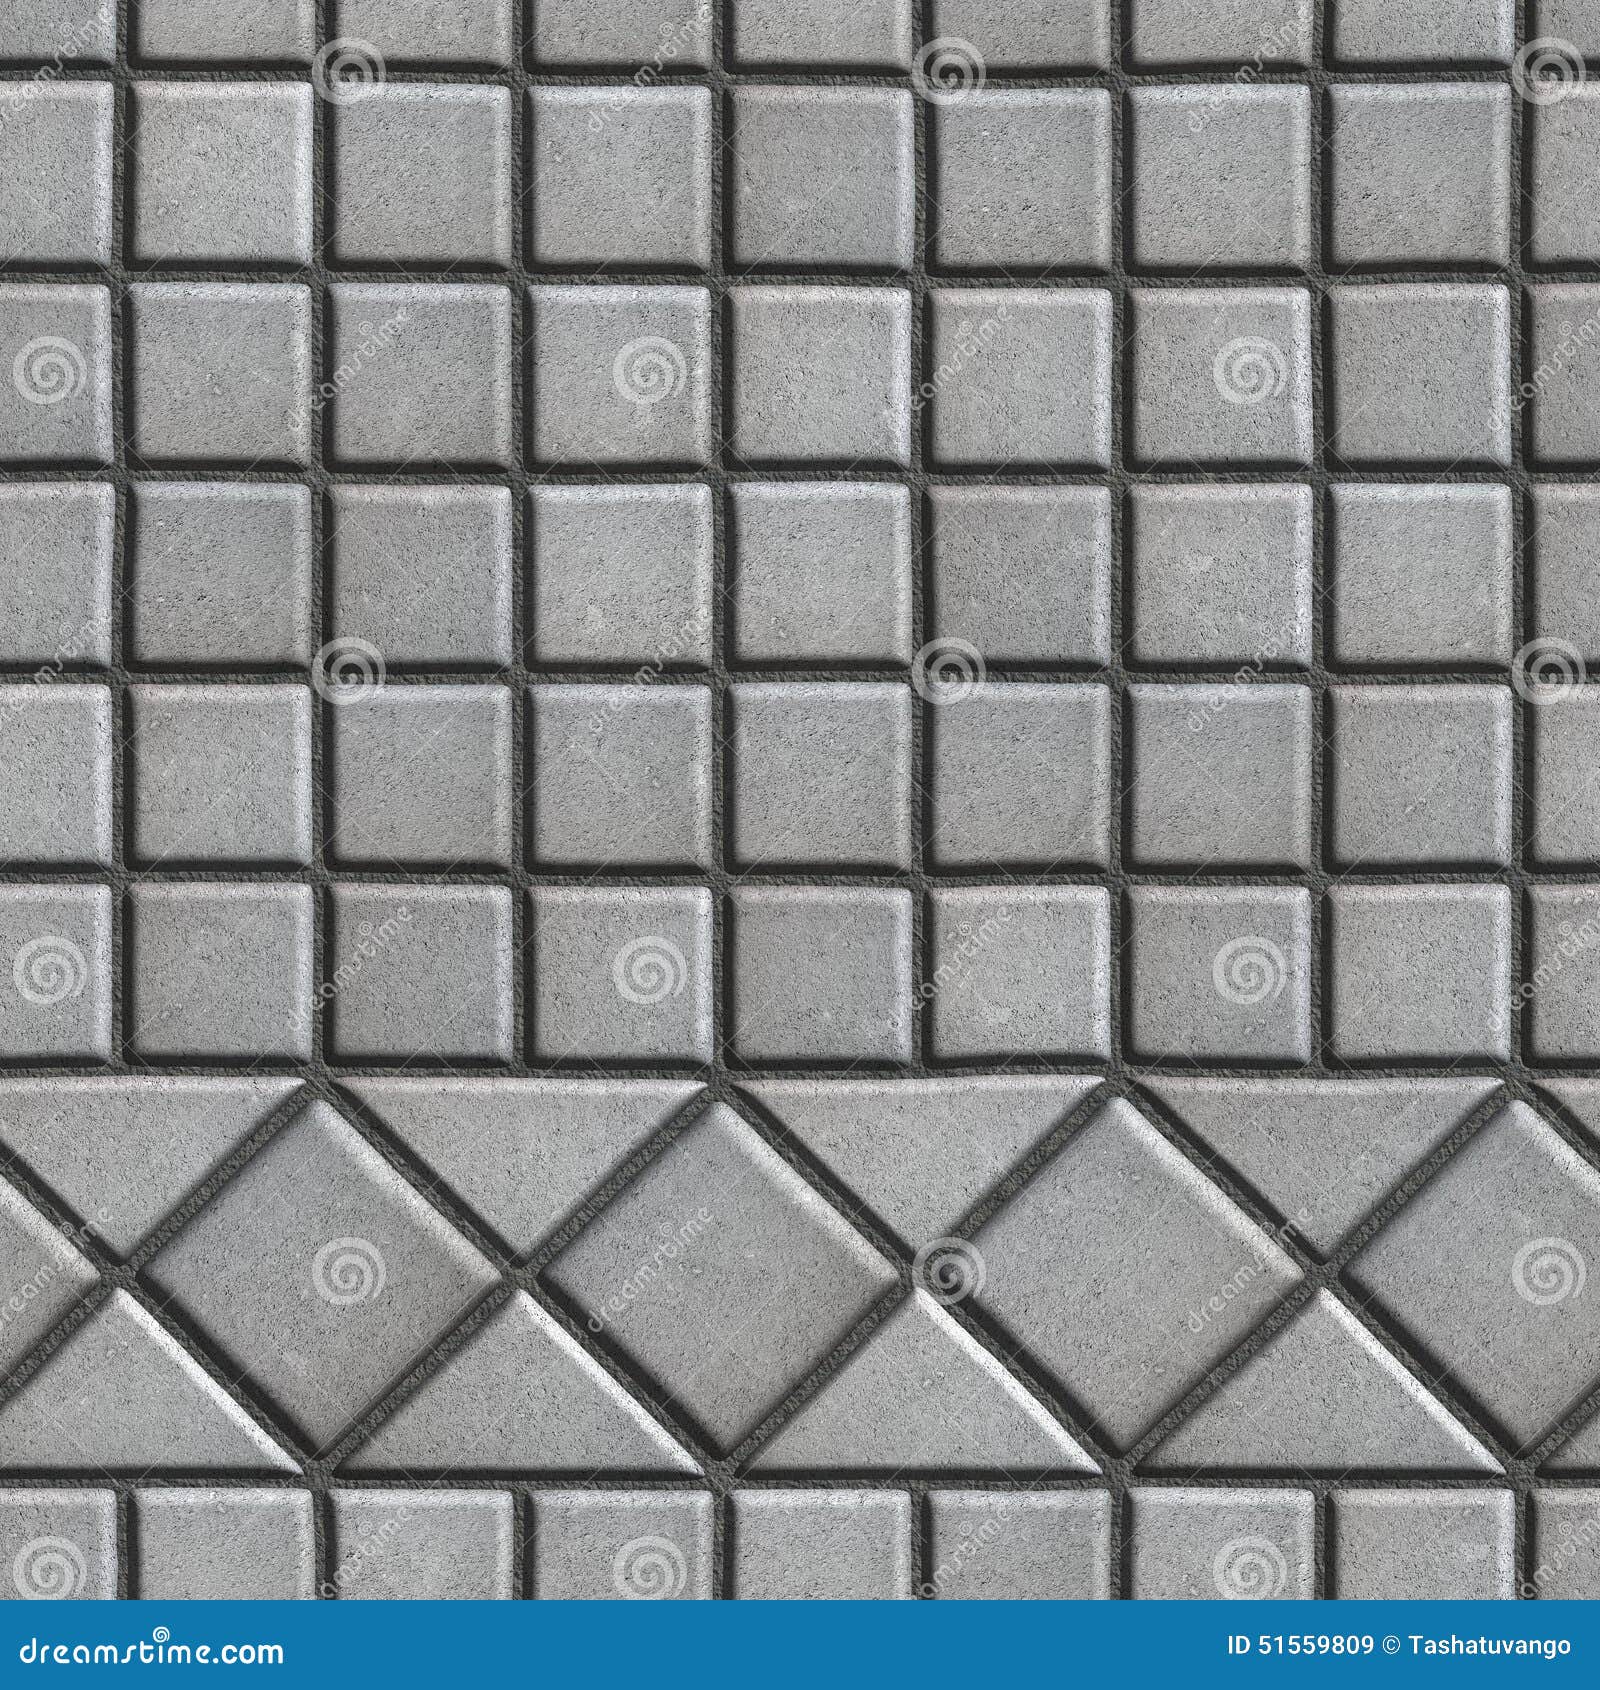 grey pave slabs in the form of small squares and